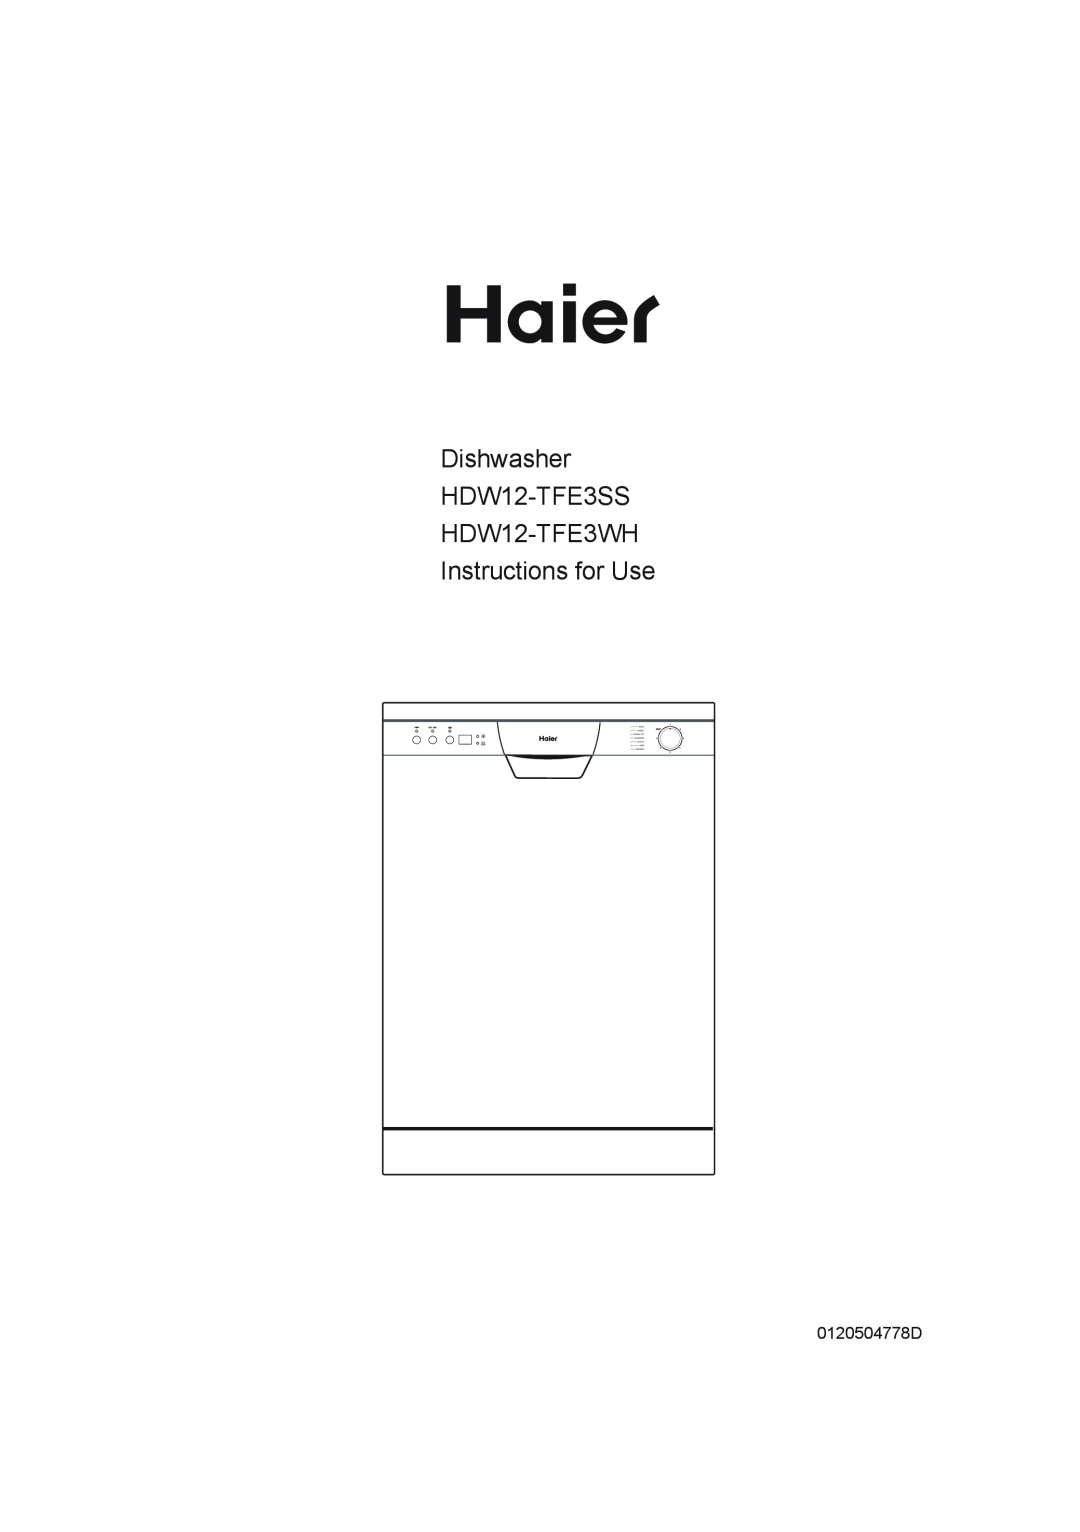 Haier manual Dishwasher HDW12-TFE3SS HDW12-TFE3WH Instructions for Use, 0120504778D 